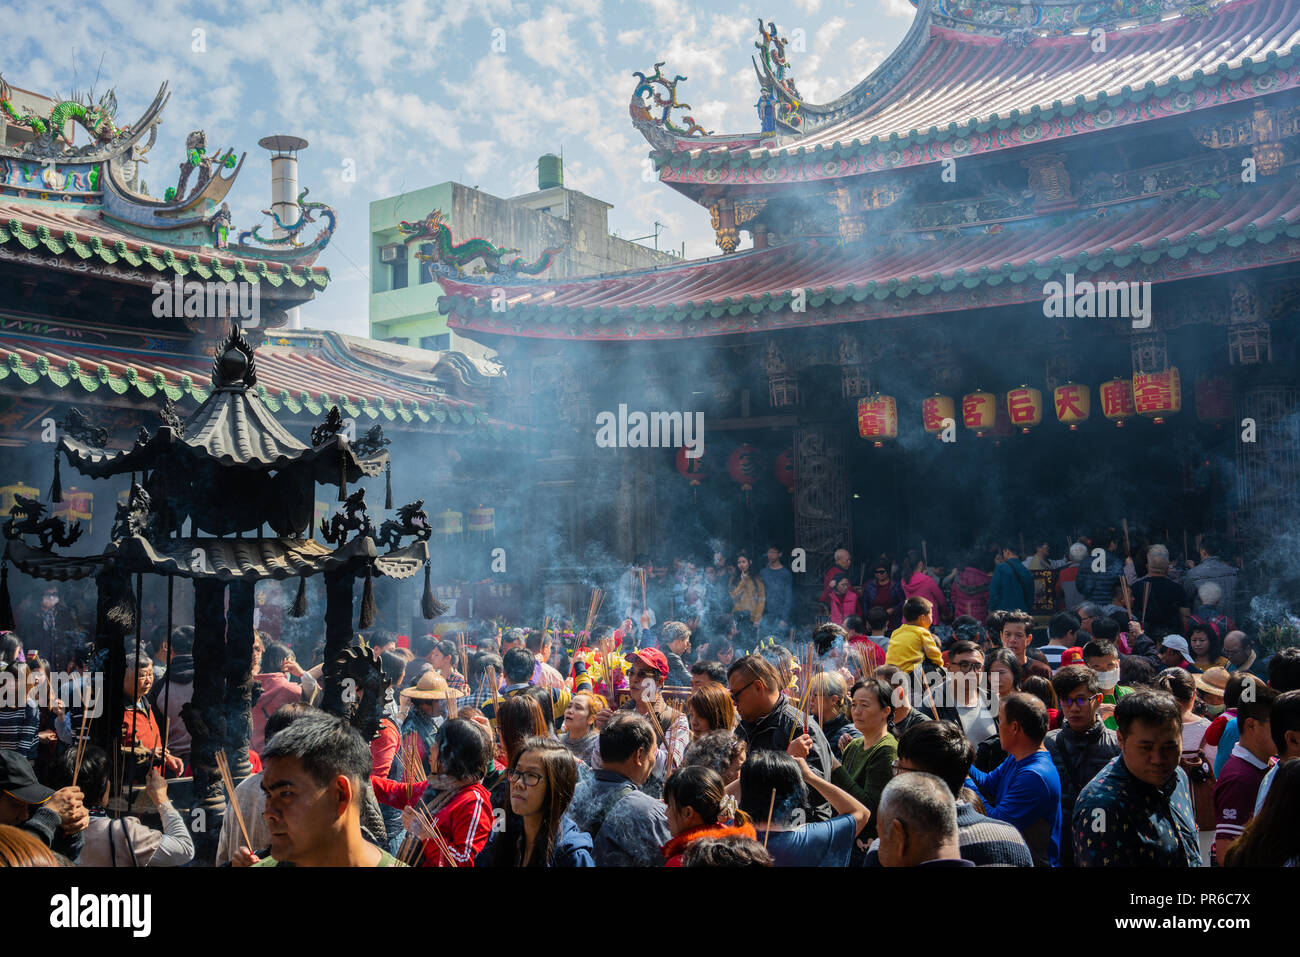 16 February 2018, Lukang Changhua Taiwan : Celebration of people and crowd on chinese new year day at Lugang Tianhou Matsu temple in Lukang Taiwan Stock Photo